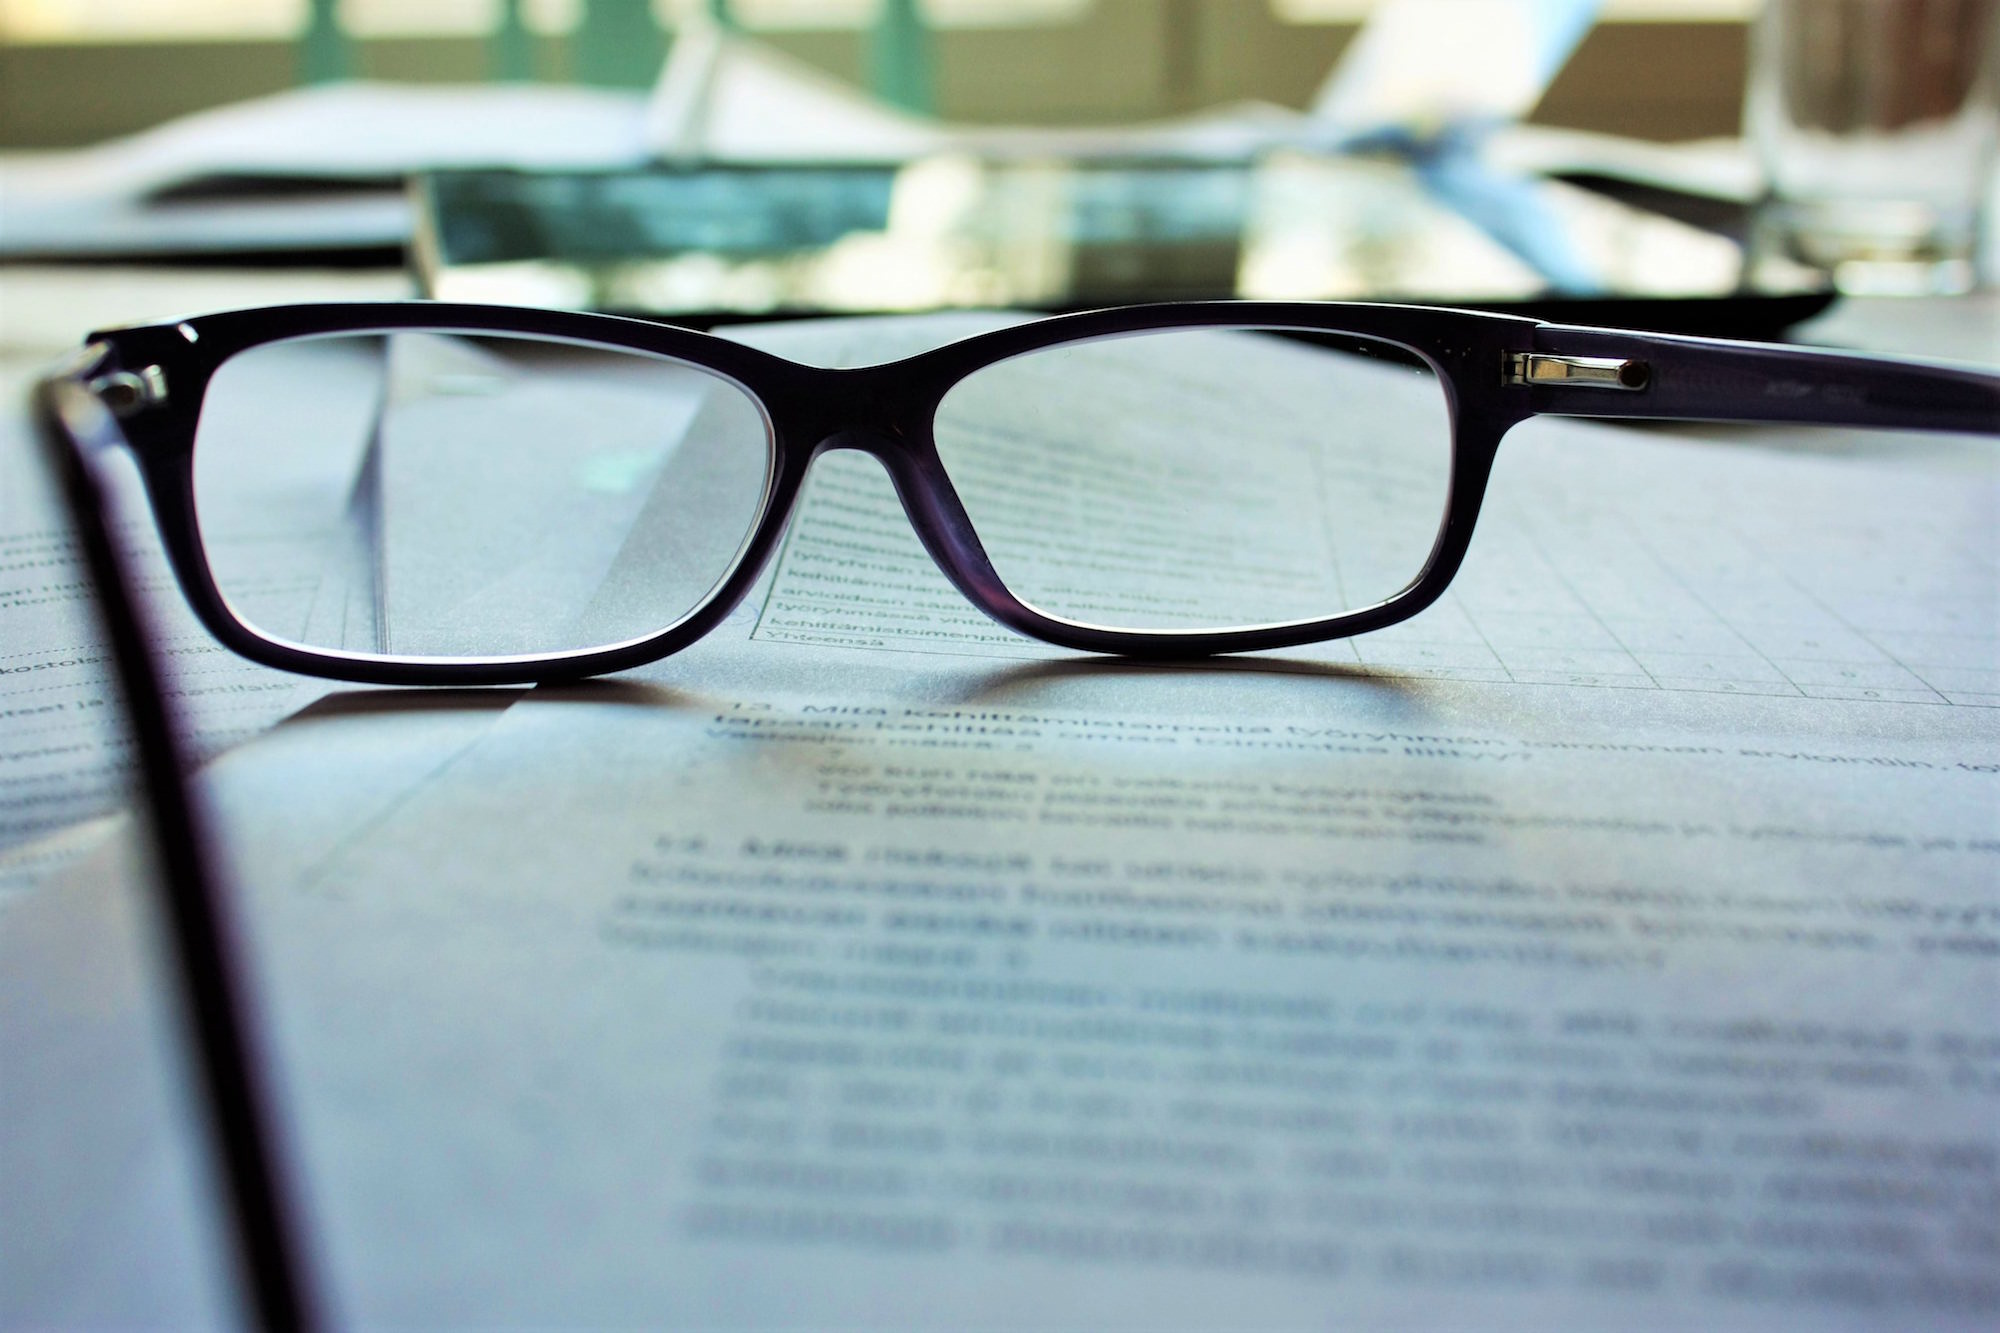 A pair of glasses sitting on top of a blurry document.